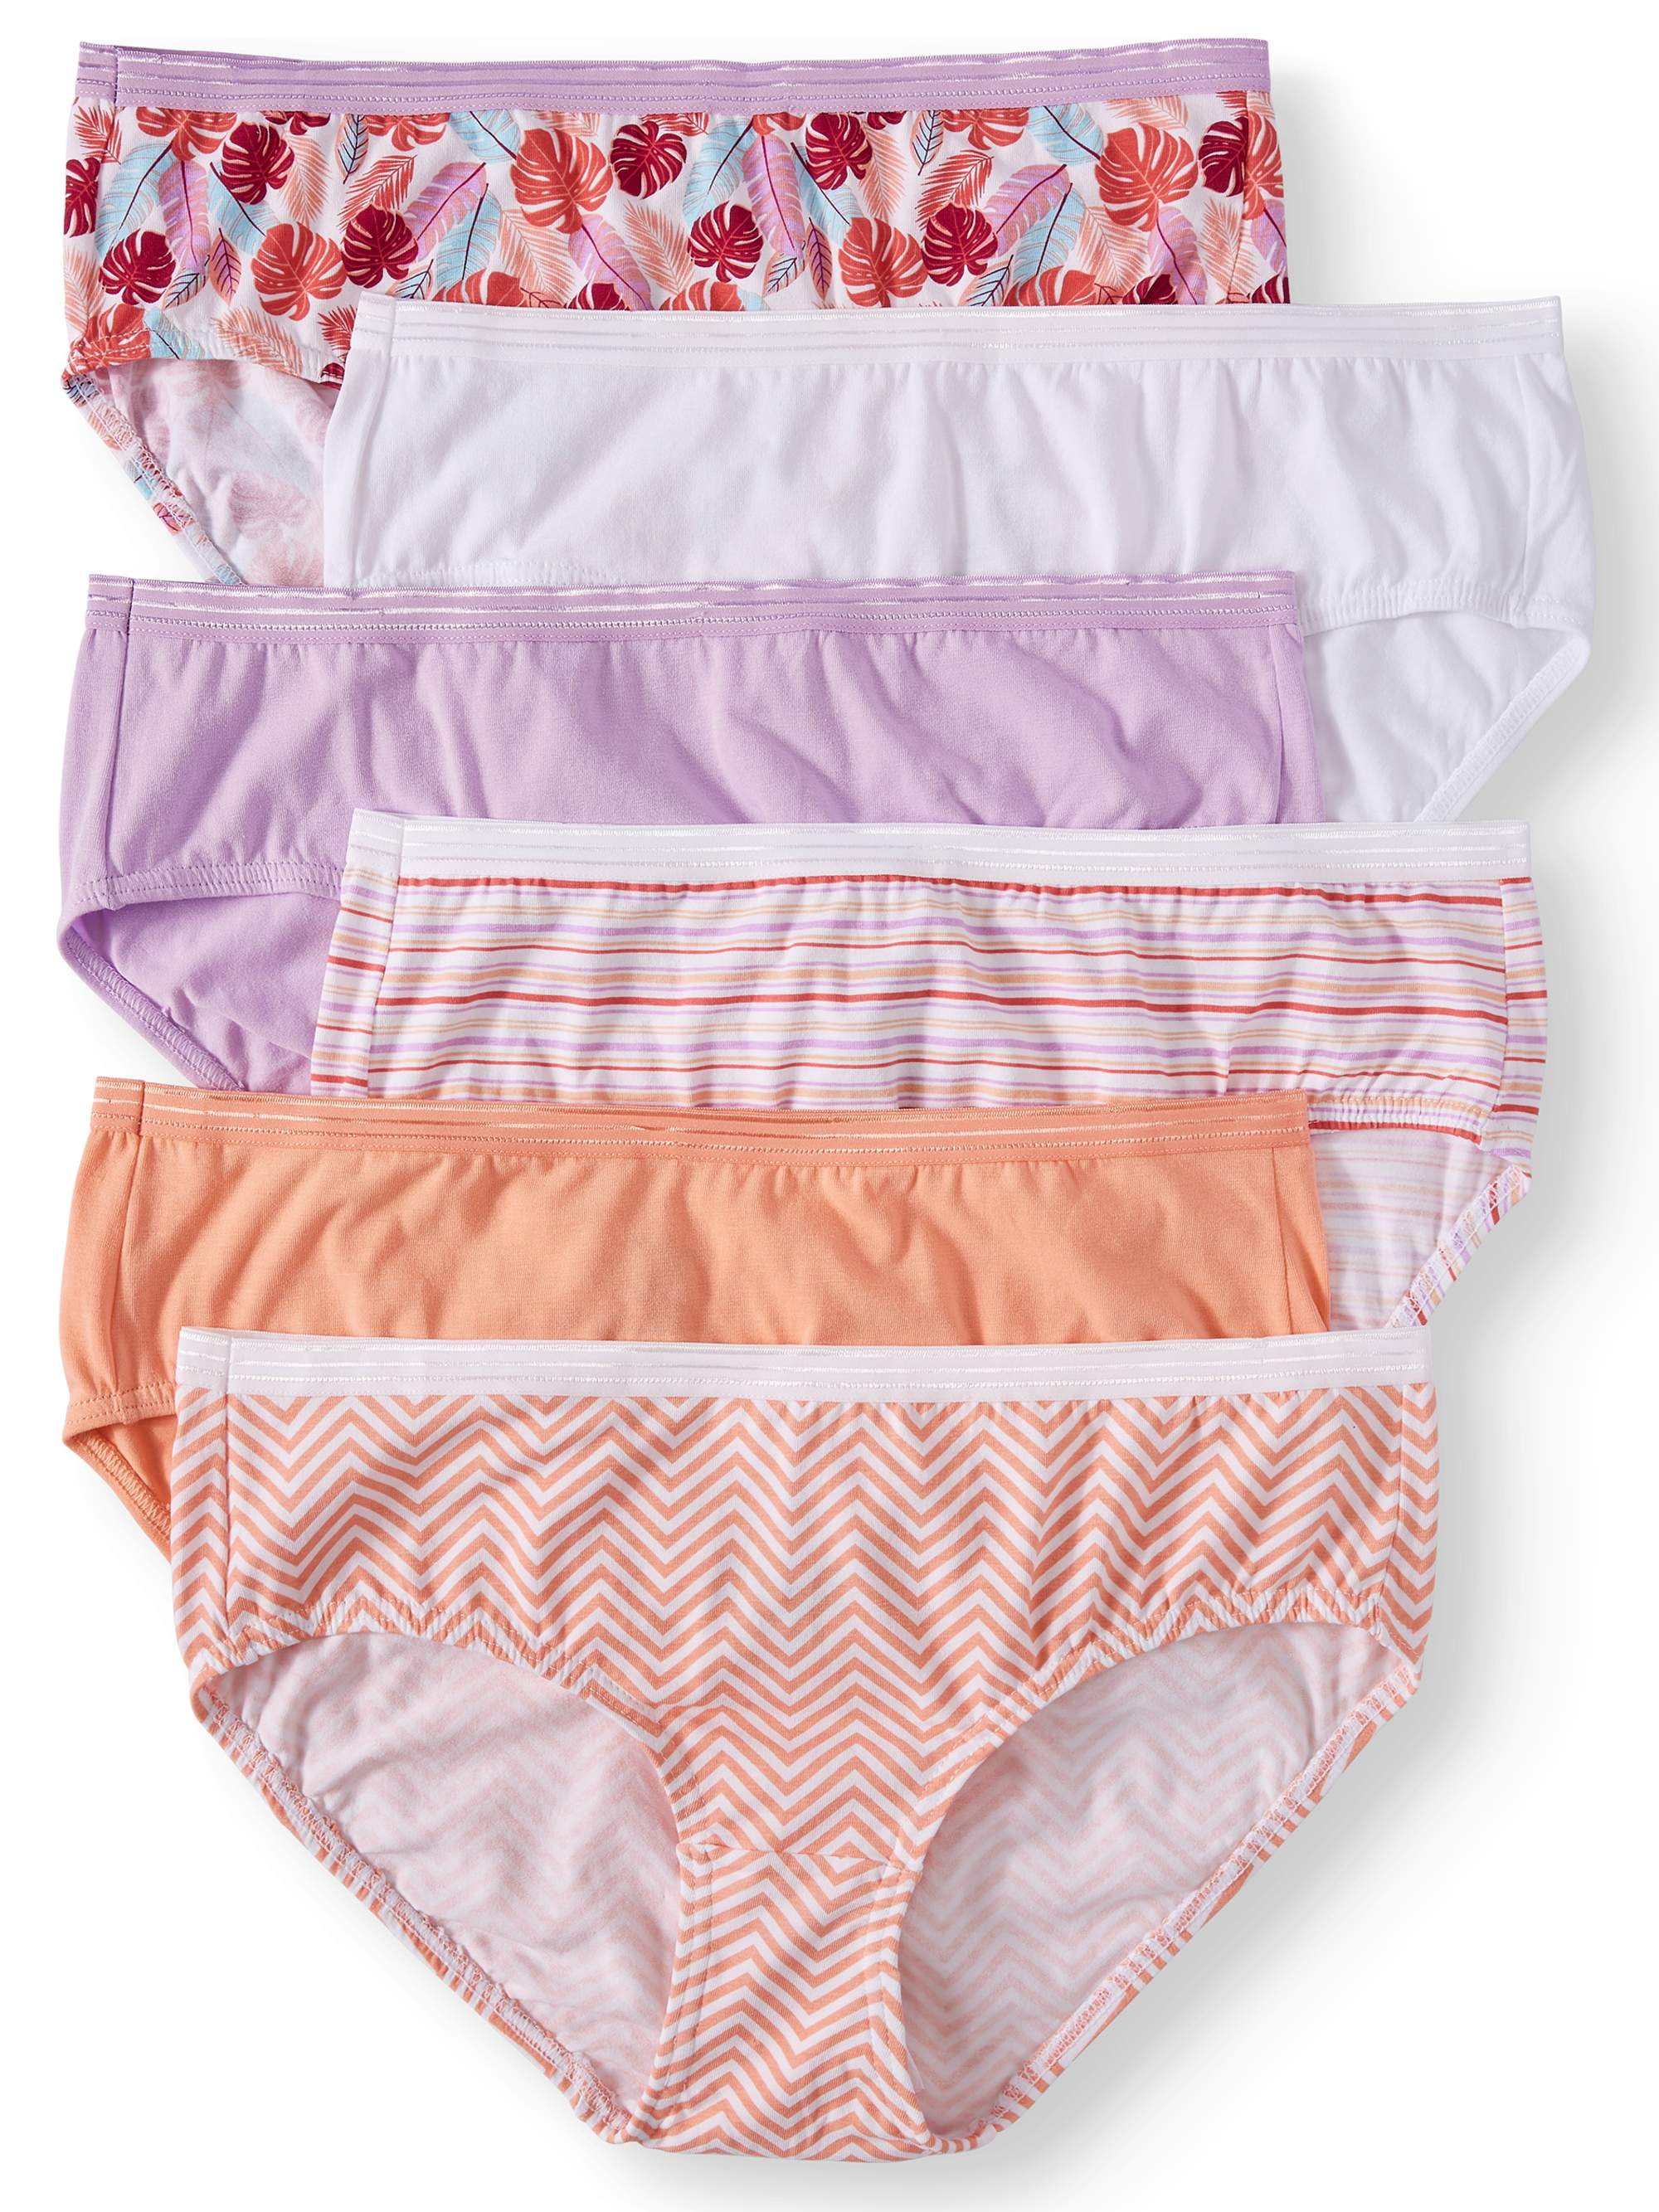 Jontis_world - Secret Treasures 6 Pack Cotton Ladies Hi-cut Hipster Bikini  Brief print knickers £9.79 Next Day Delivery On All Orders Placed Before  Midday - Excludes Weekends Short Description These Secret Treasures